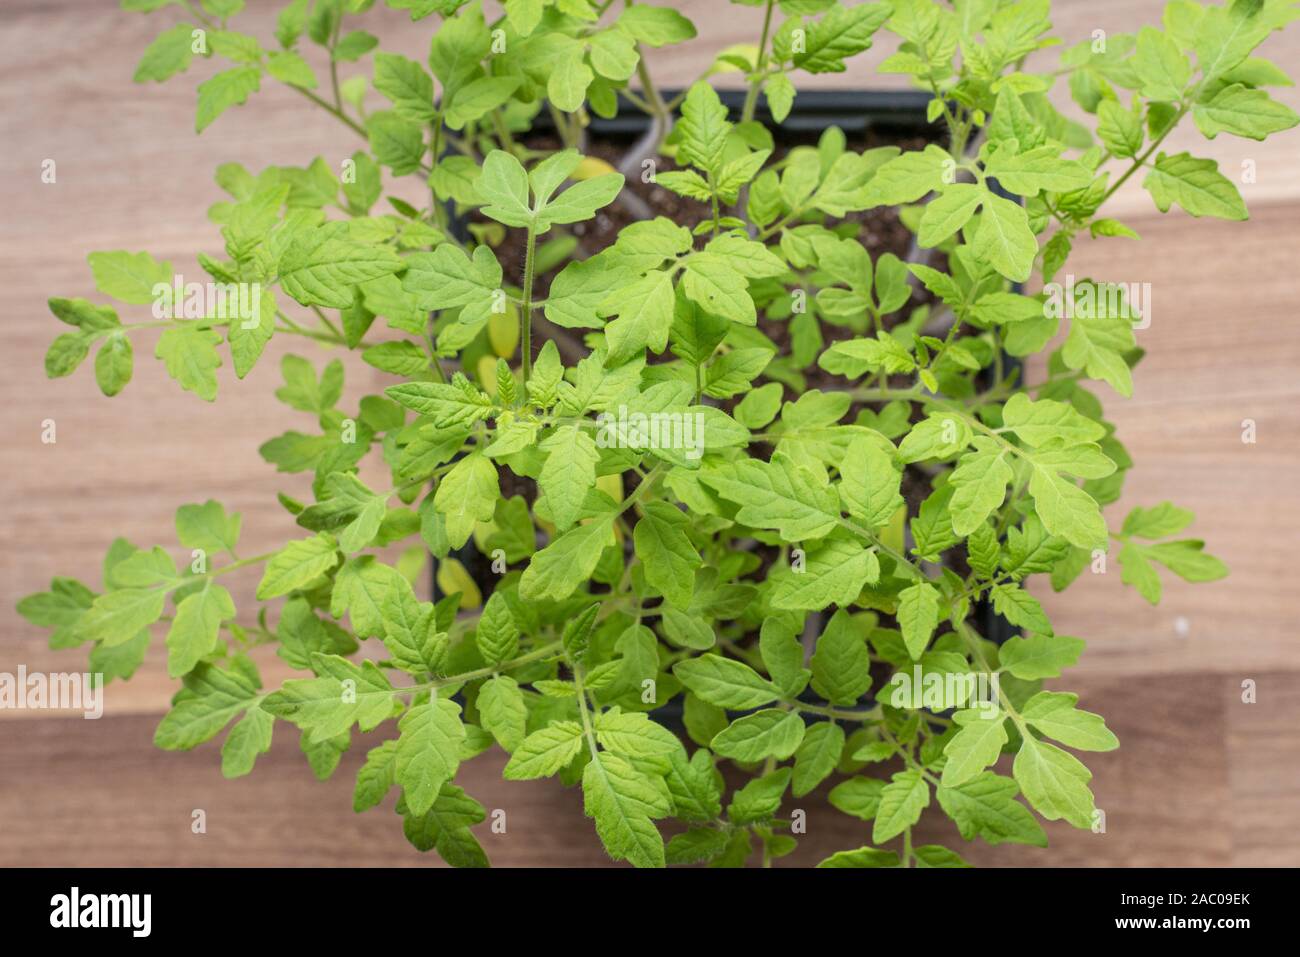 Tomato seedlings in pot from above Stock Photo